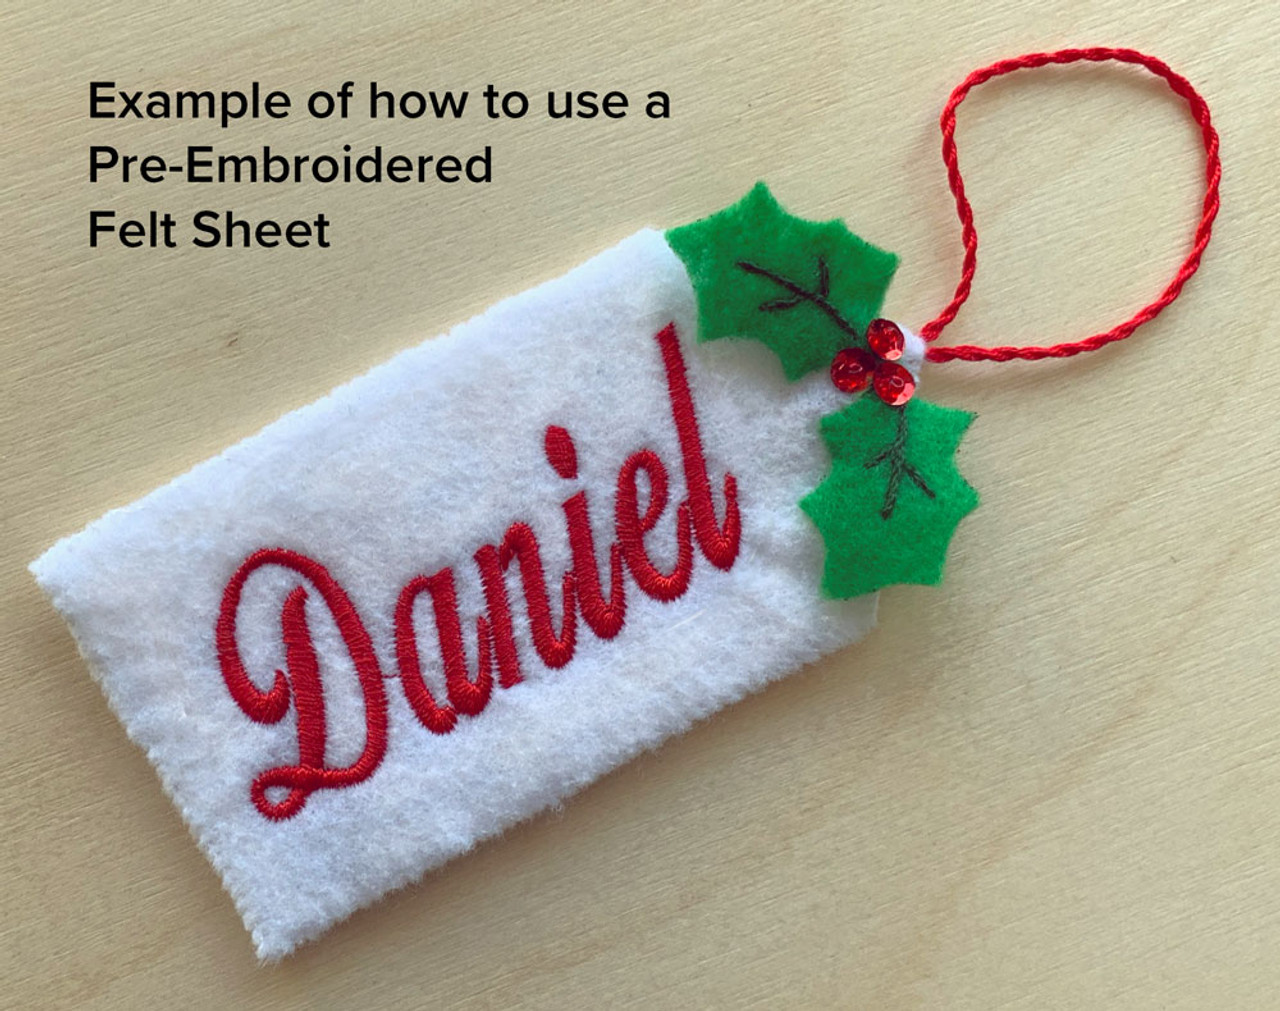 Pre-embroidered Felt Sheet for Stocking Kit Personalization